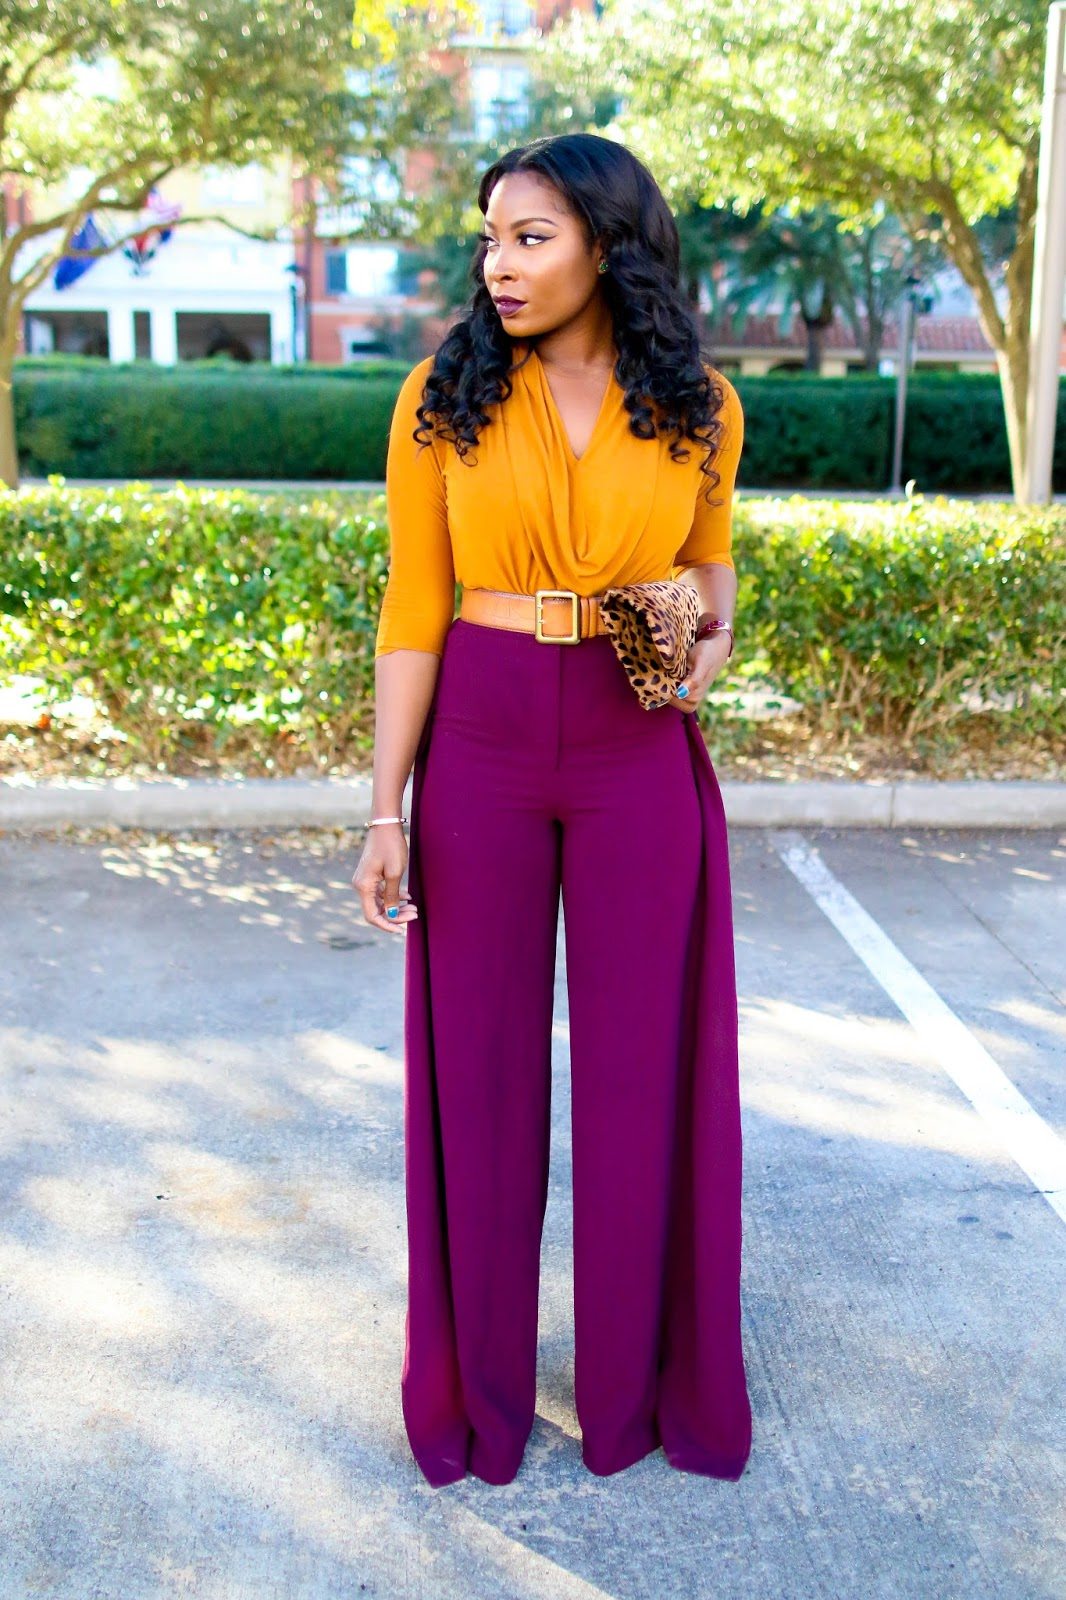 Check Out All The Fun Ways You Can Style Your Wide-Leg Trousers